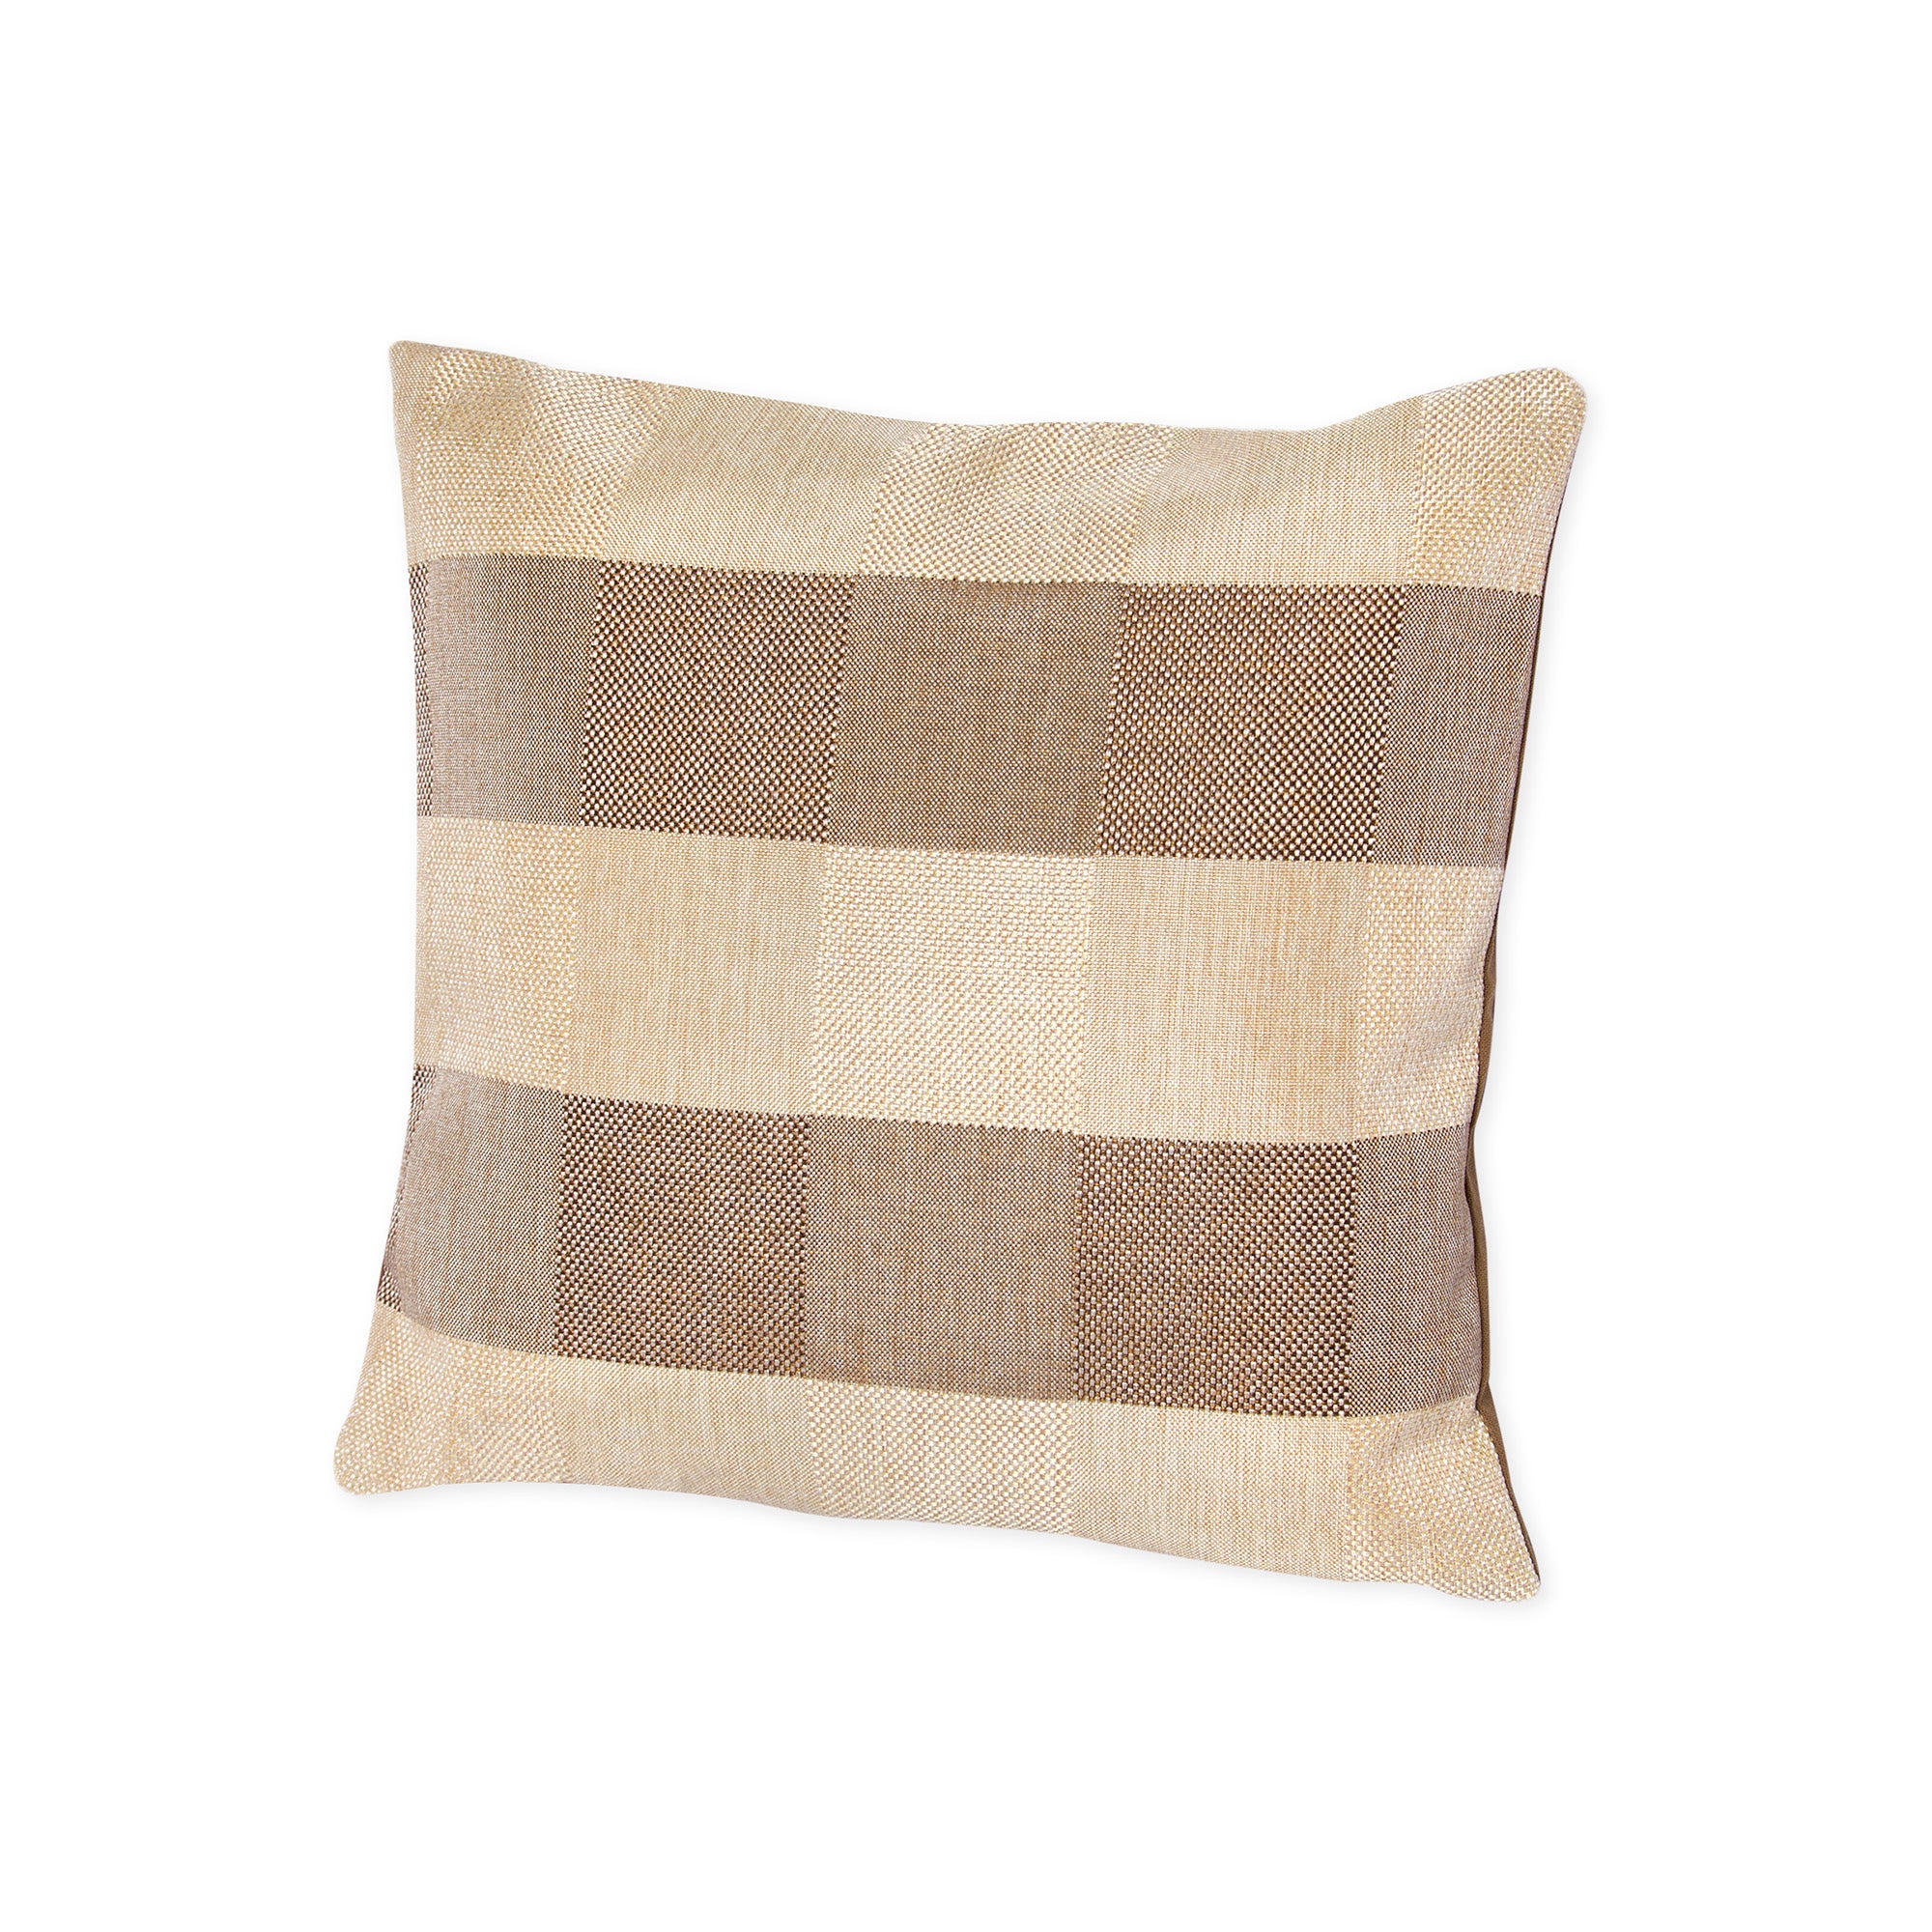 Oatmeal Stirling Cushion Cover